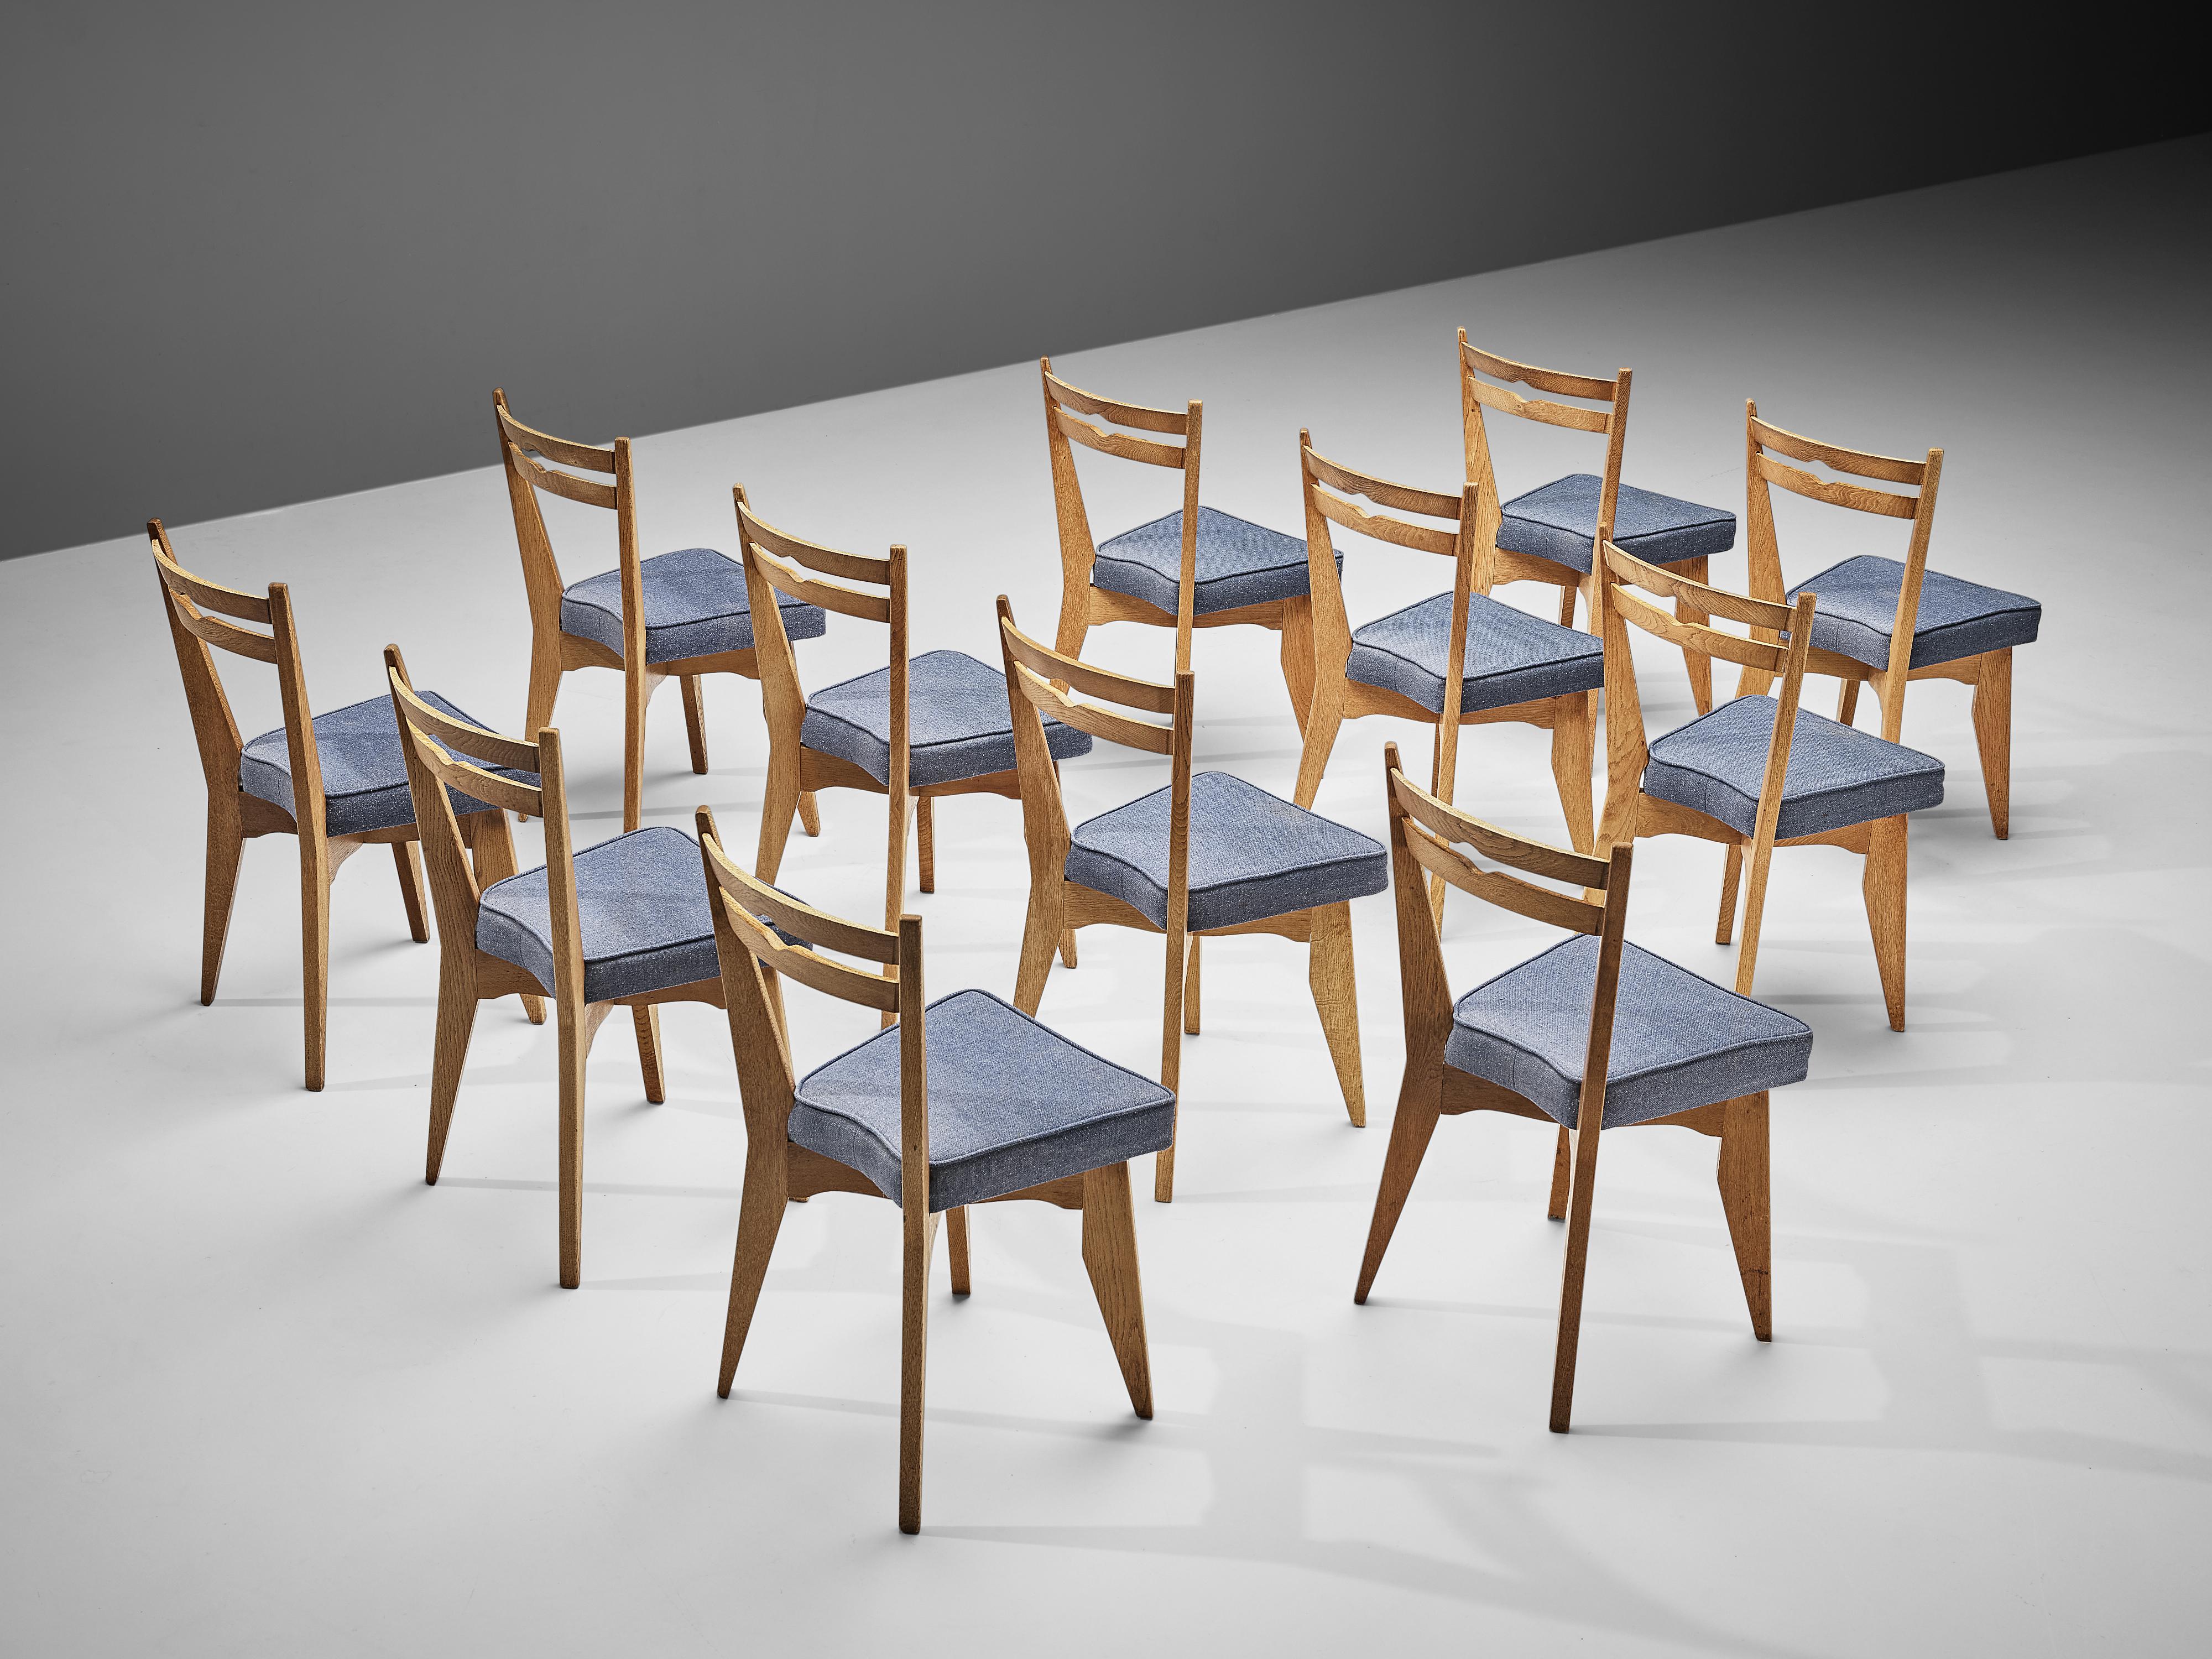 Guillerme et Chambron, set of twelve dining chairs, solid oak, fabric upholstery, France, 1960s

These dining chairs in solid oak are designed by the French designer duo Jacques Chambron and Robert Guillerme. On four tapered legs rests the seating